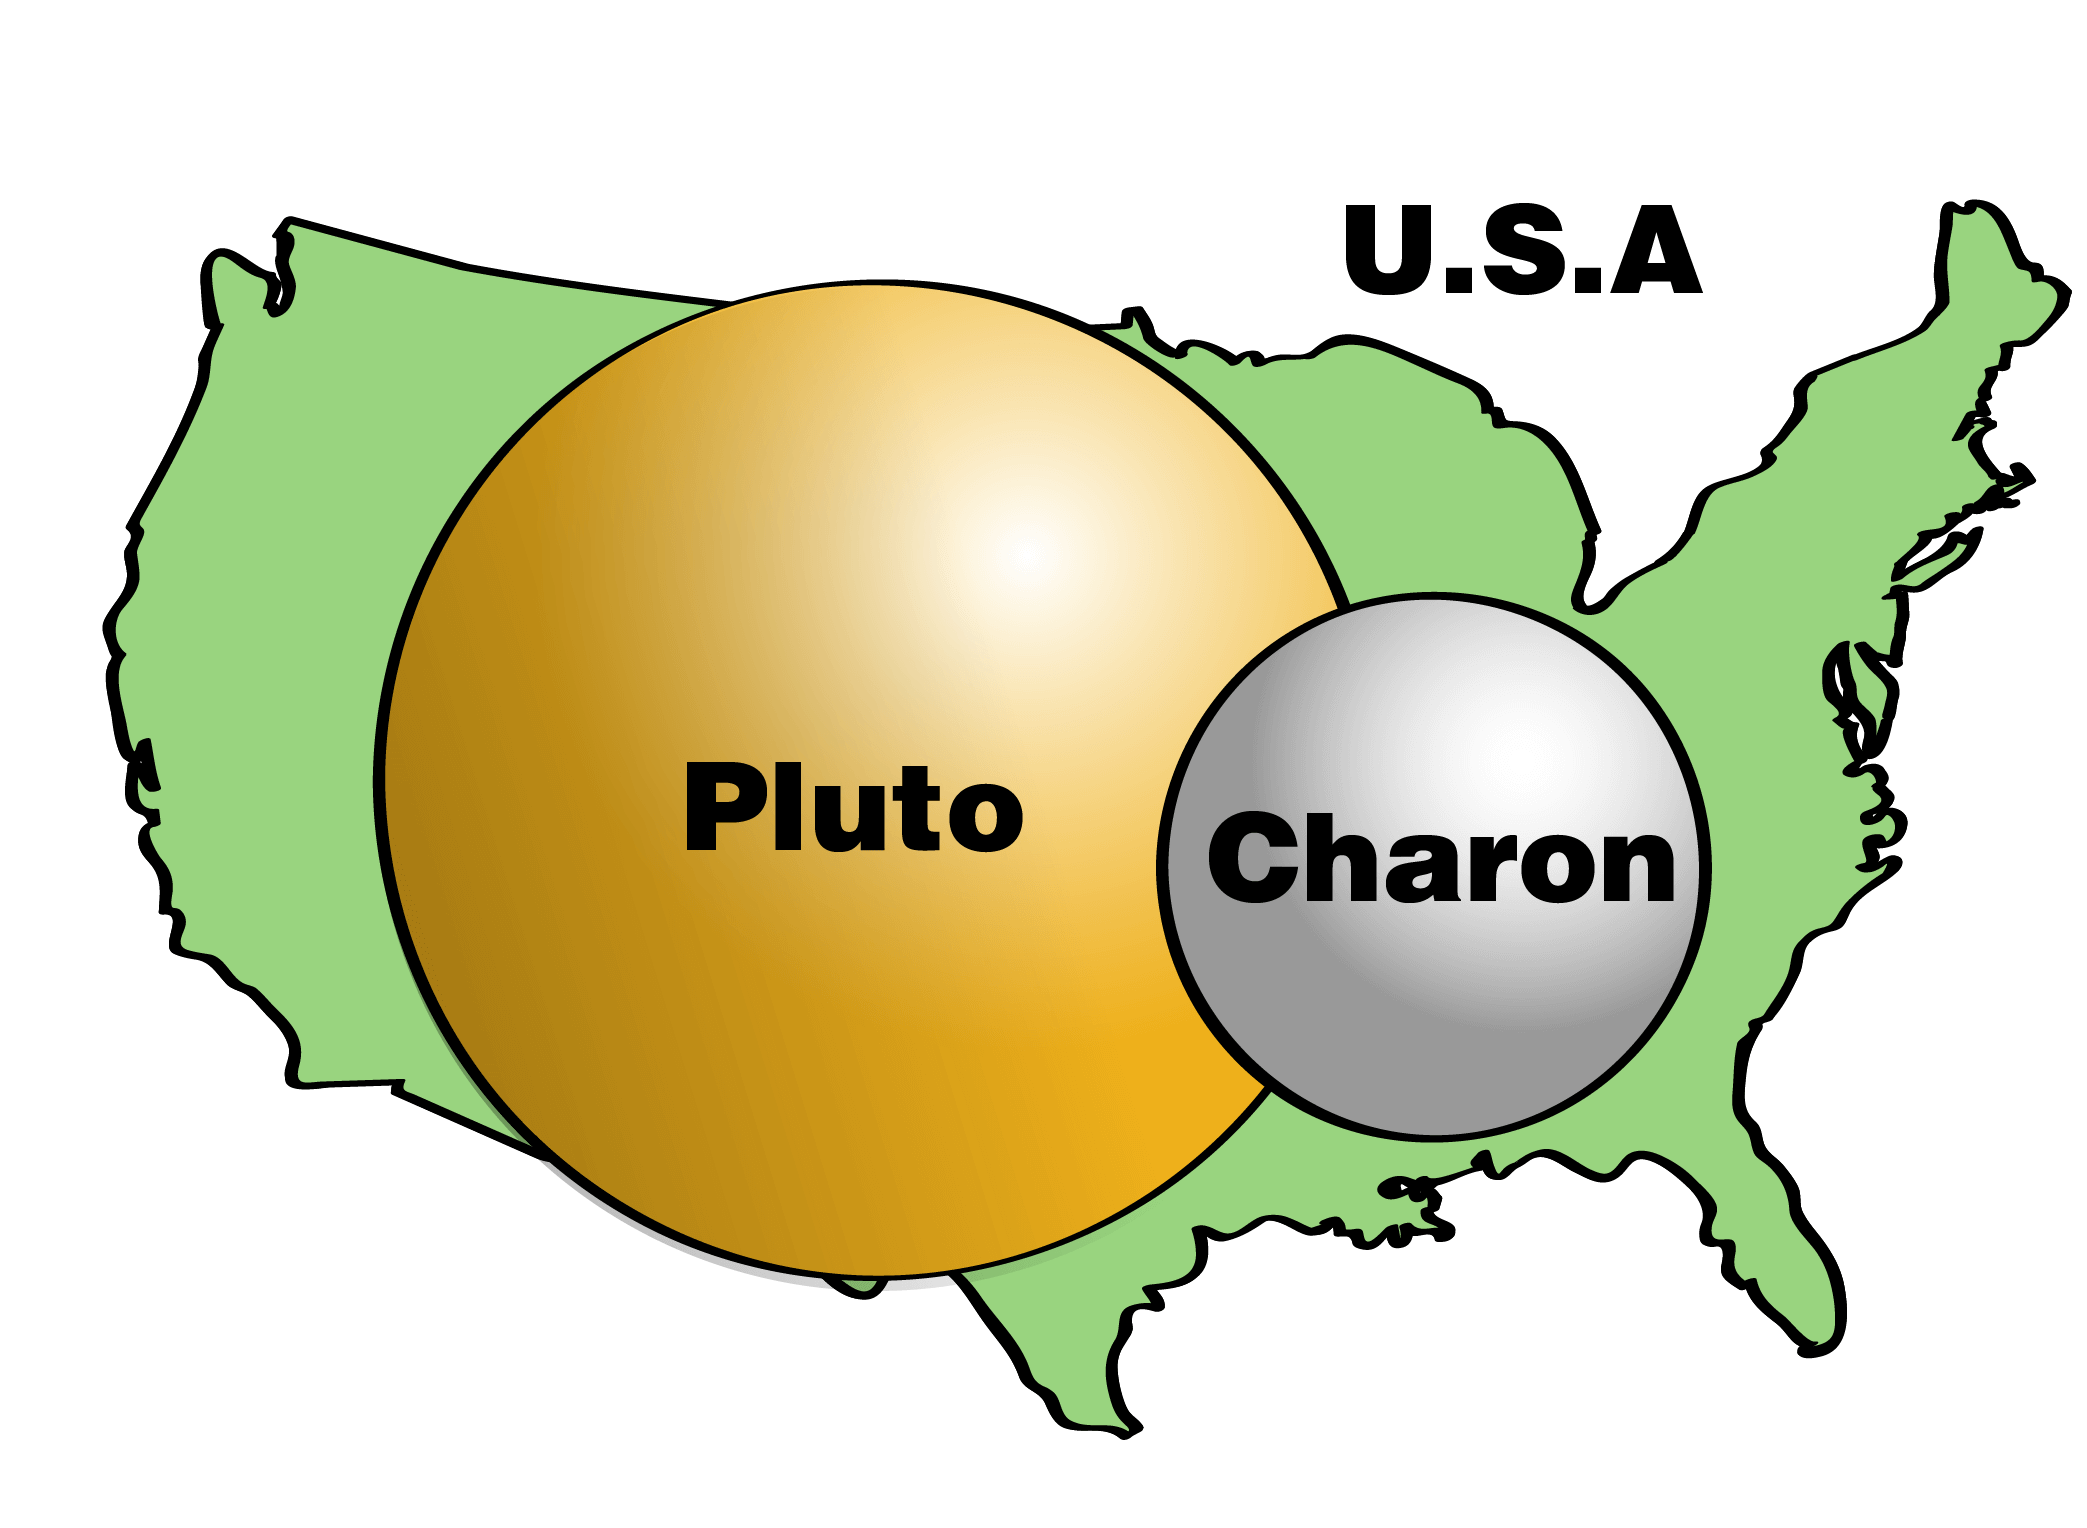 The sizes of Pluto and Charon compared to the United States. Pluto is only about half the width of the United States. Charon is about half the size of Pluto.